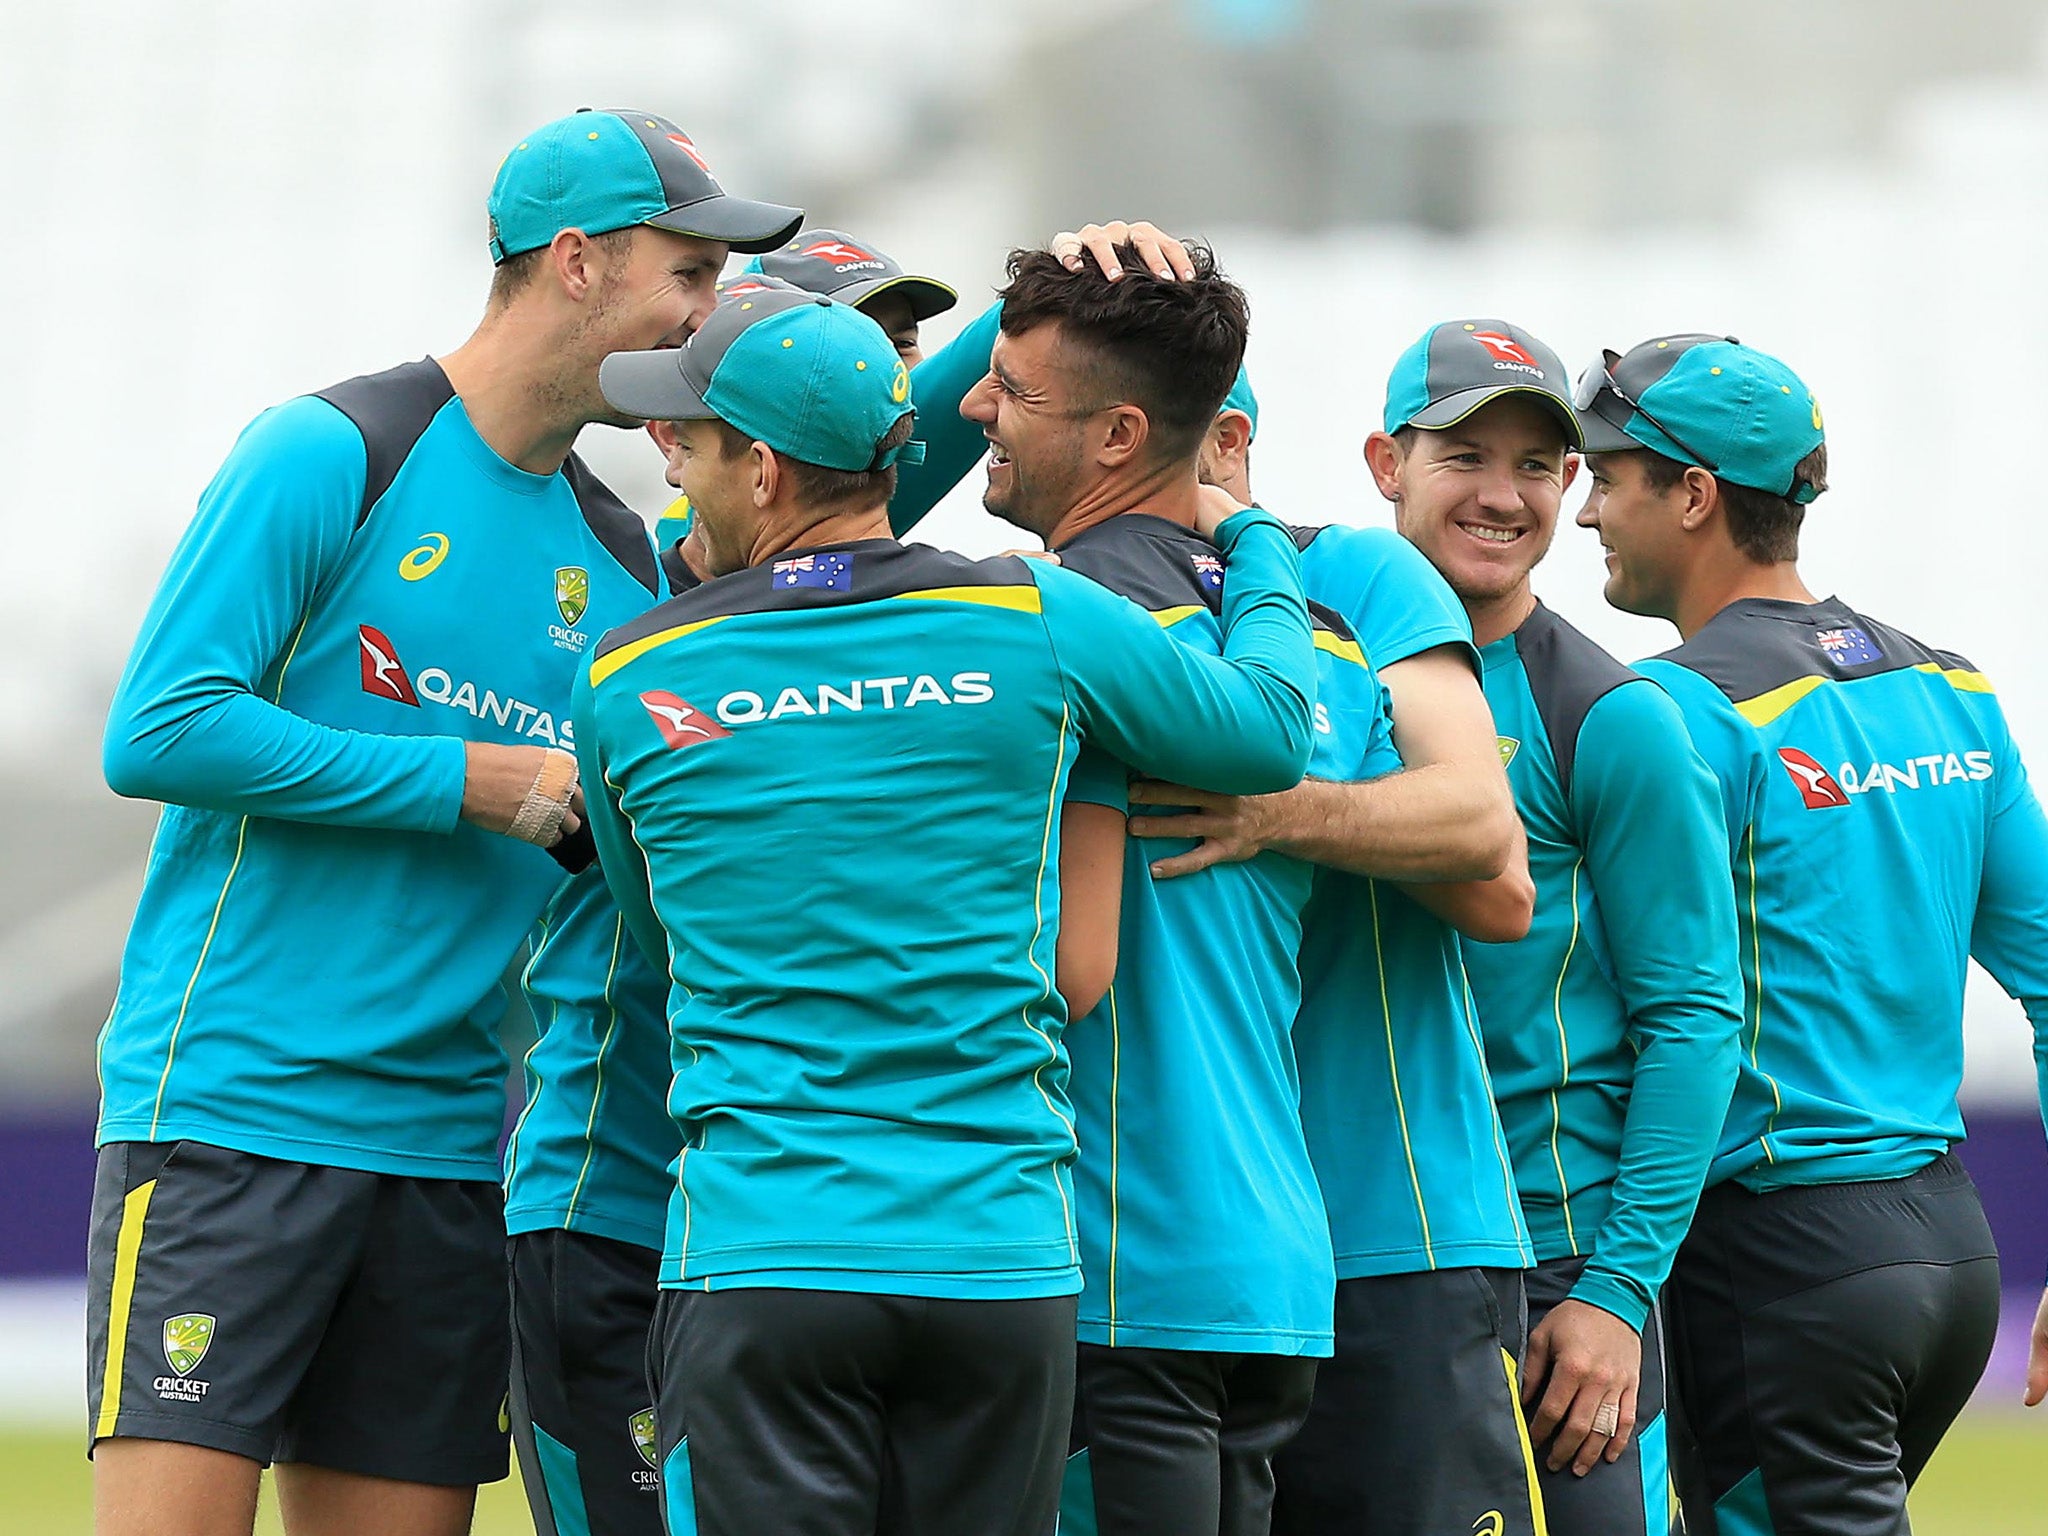 Australia are looking to turn over a new leaf after the scandal in South Africa